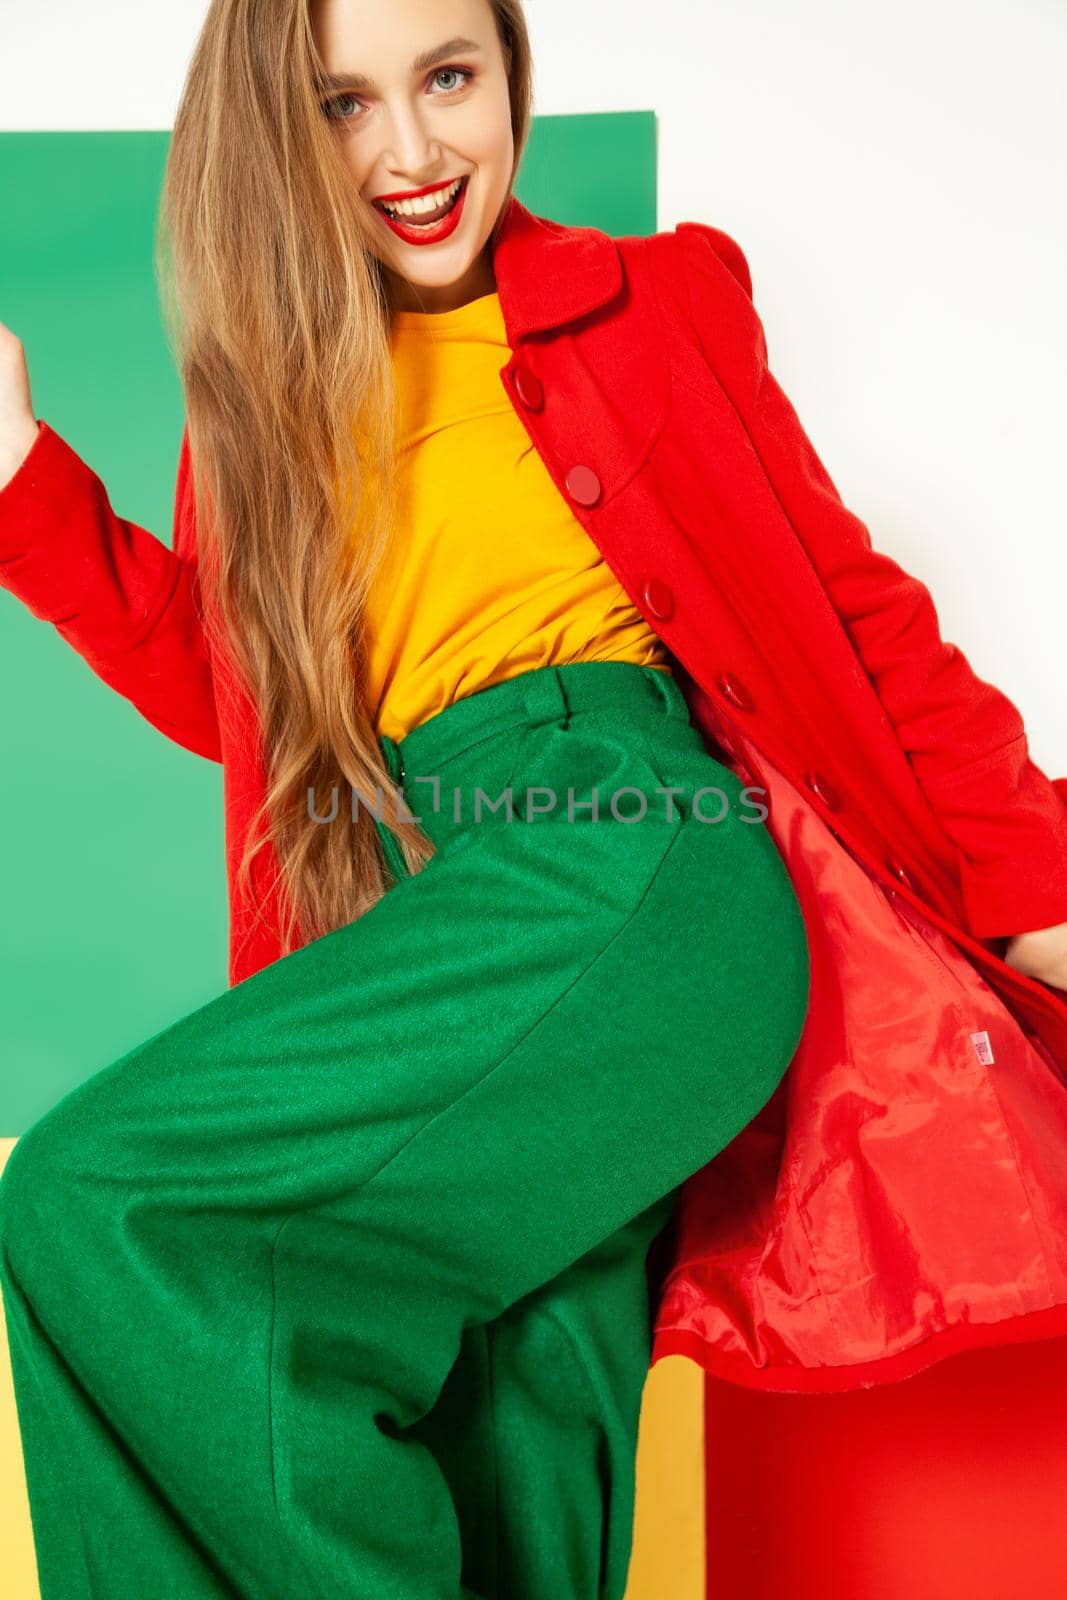 Smiling fashionable woman in bright colorful outfit by Julenochek